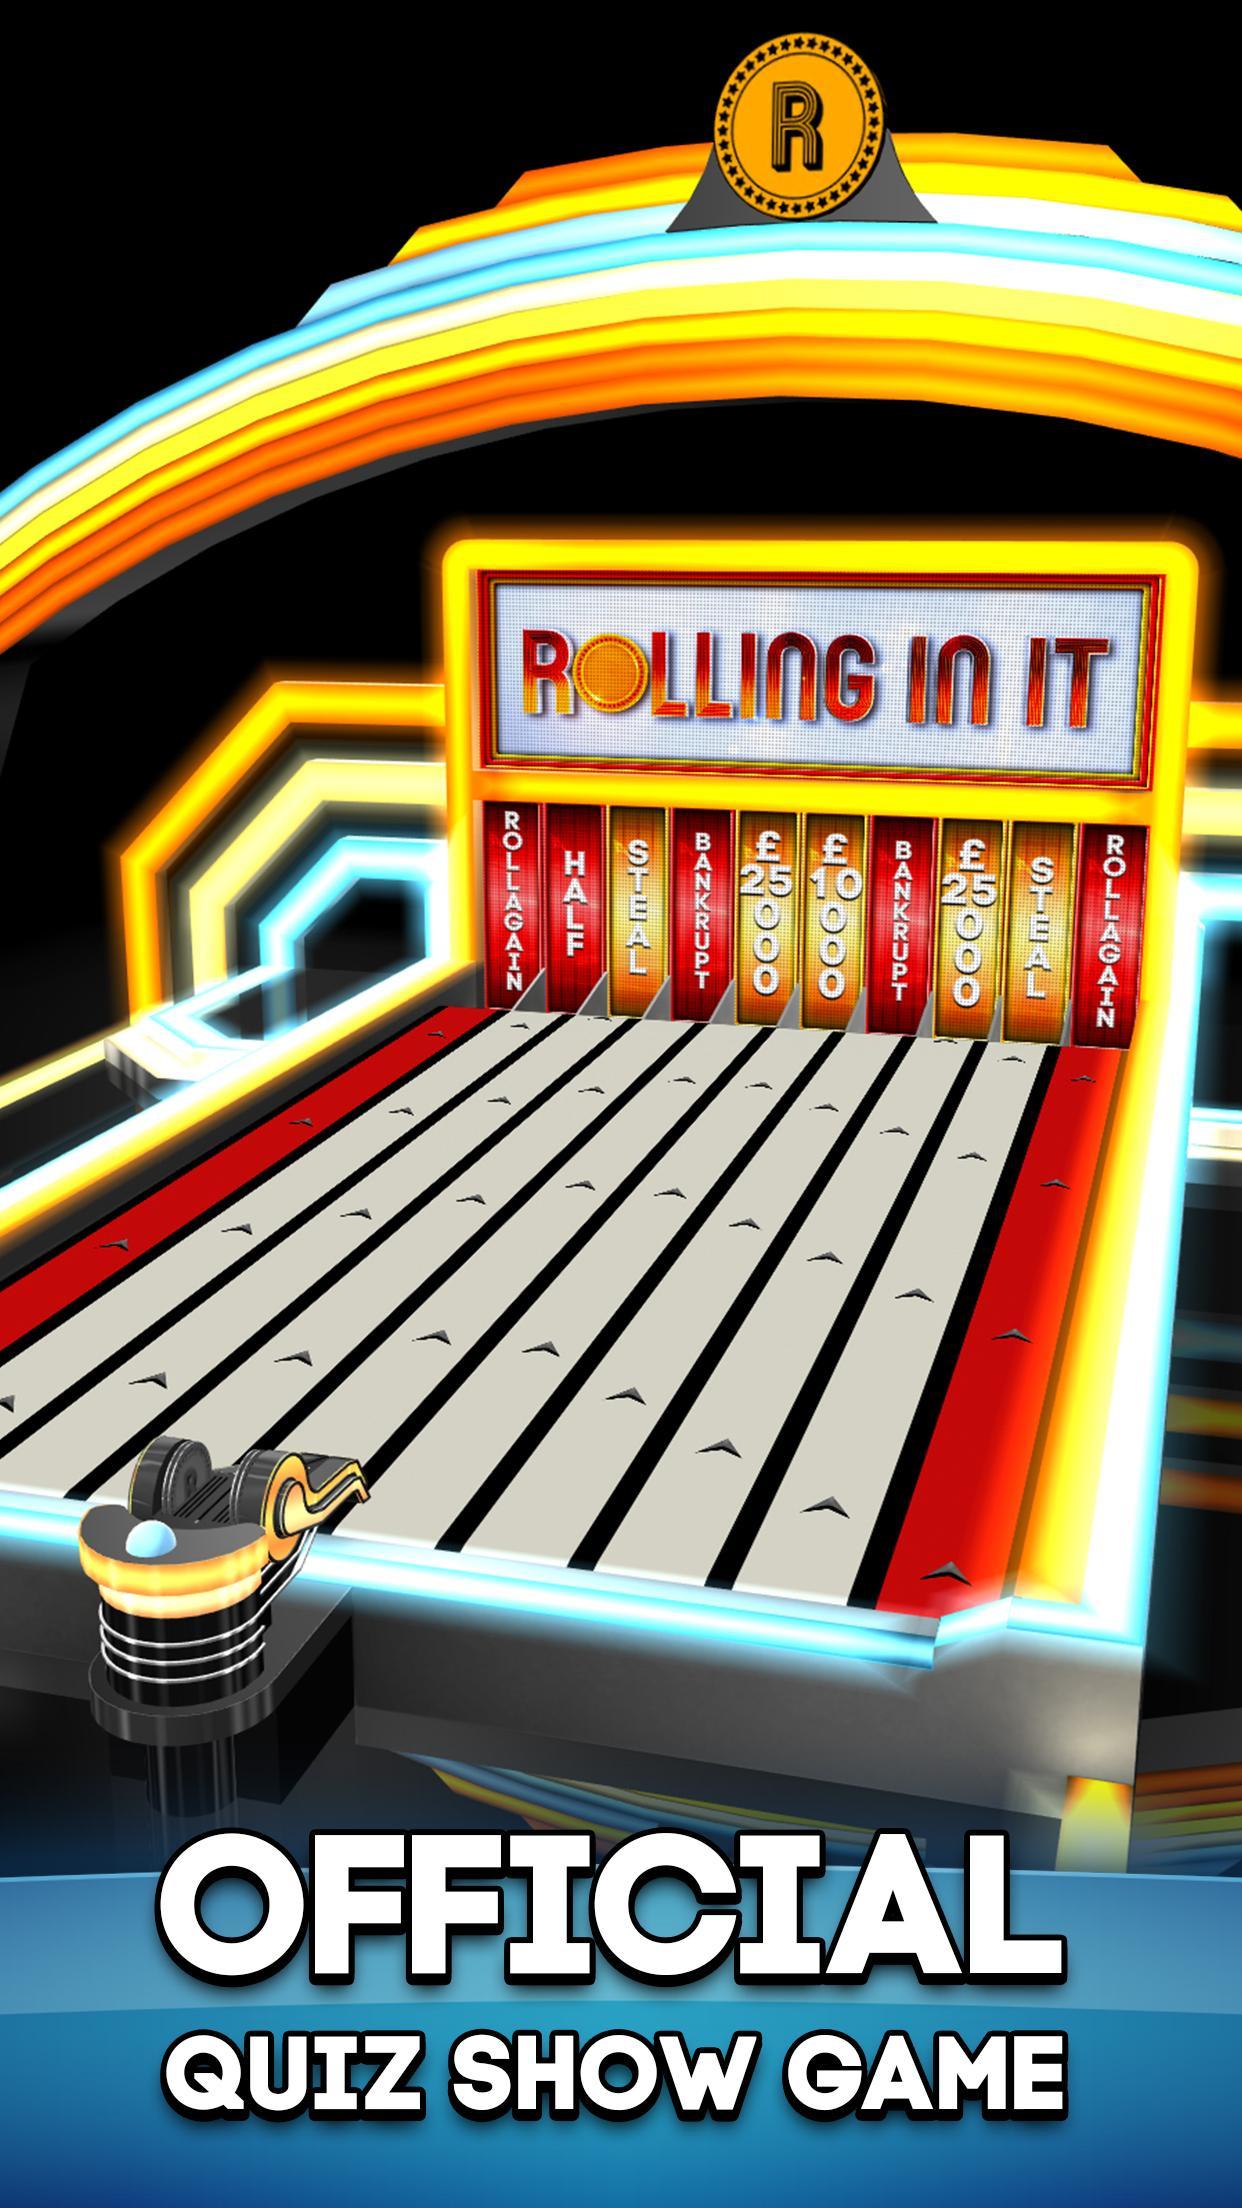 Rolling In It Official TV Show Trivia Quiz Game 1.3.3 Screenshot 1